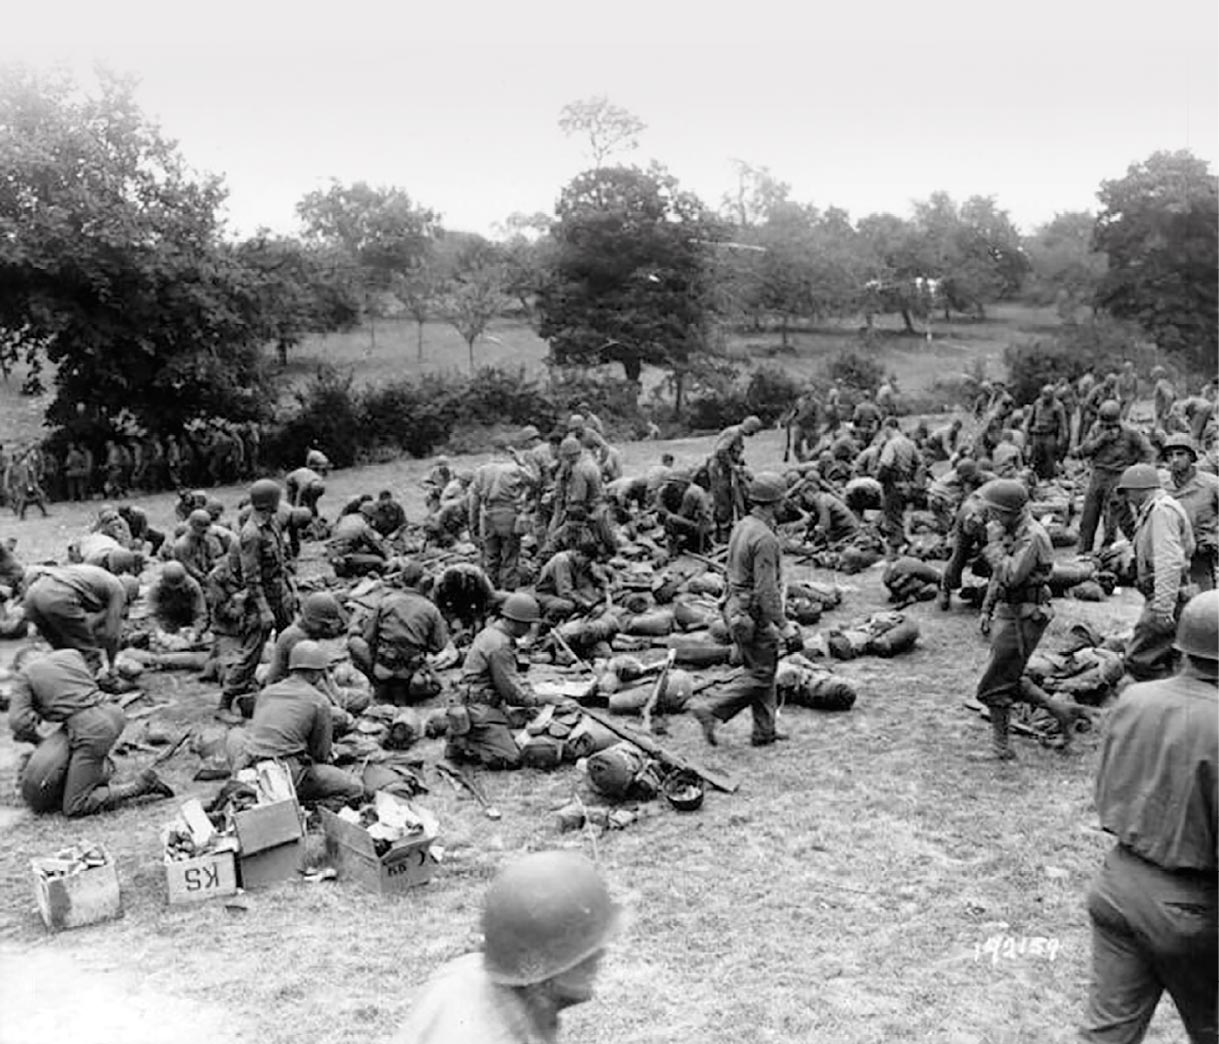 Replacements for the 90th Infantry Division ready their packs for life on the front lines July 1944 in Prétot-Sainte-Suzanne, France.